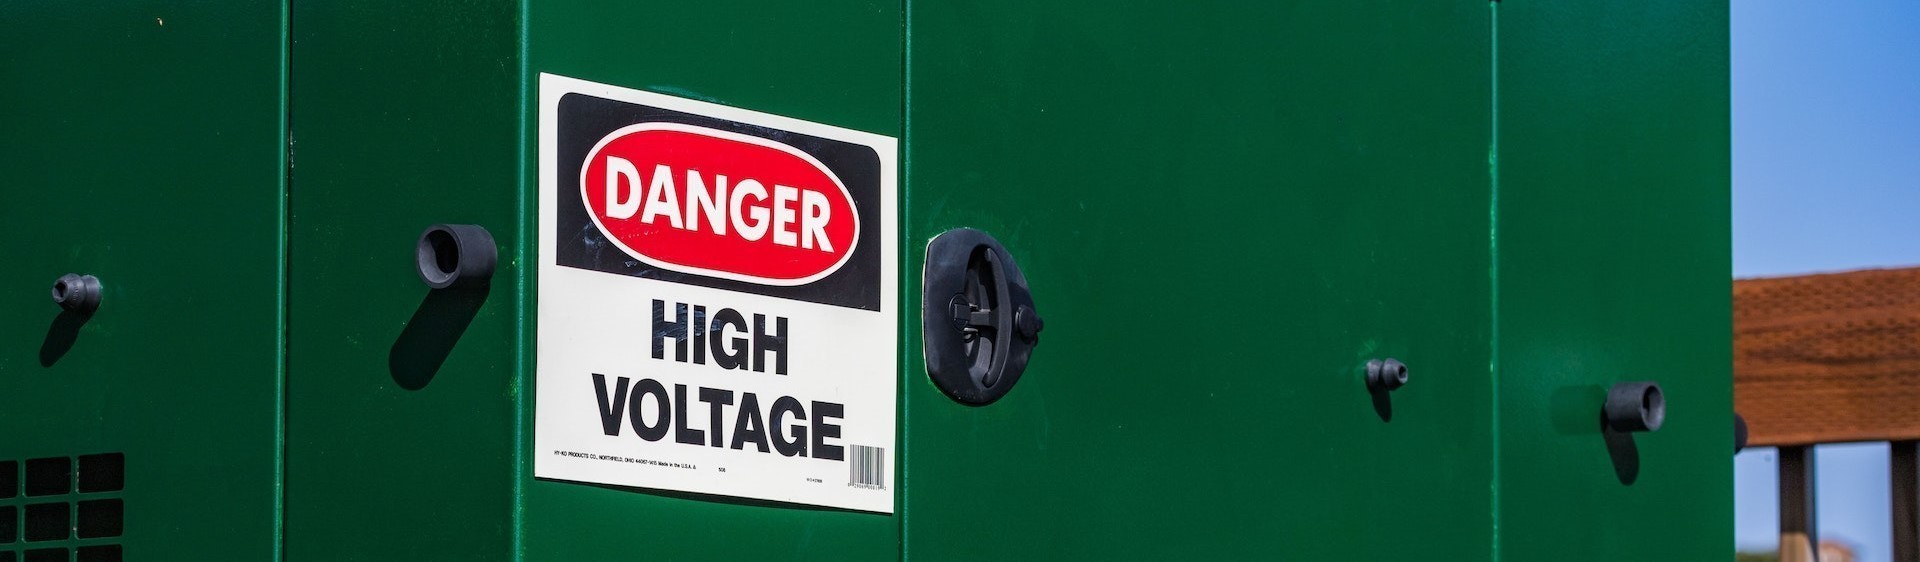 A high voltage danger sign mounted on an electrical equipment box